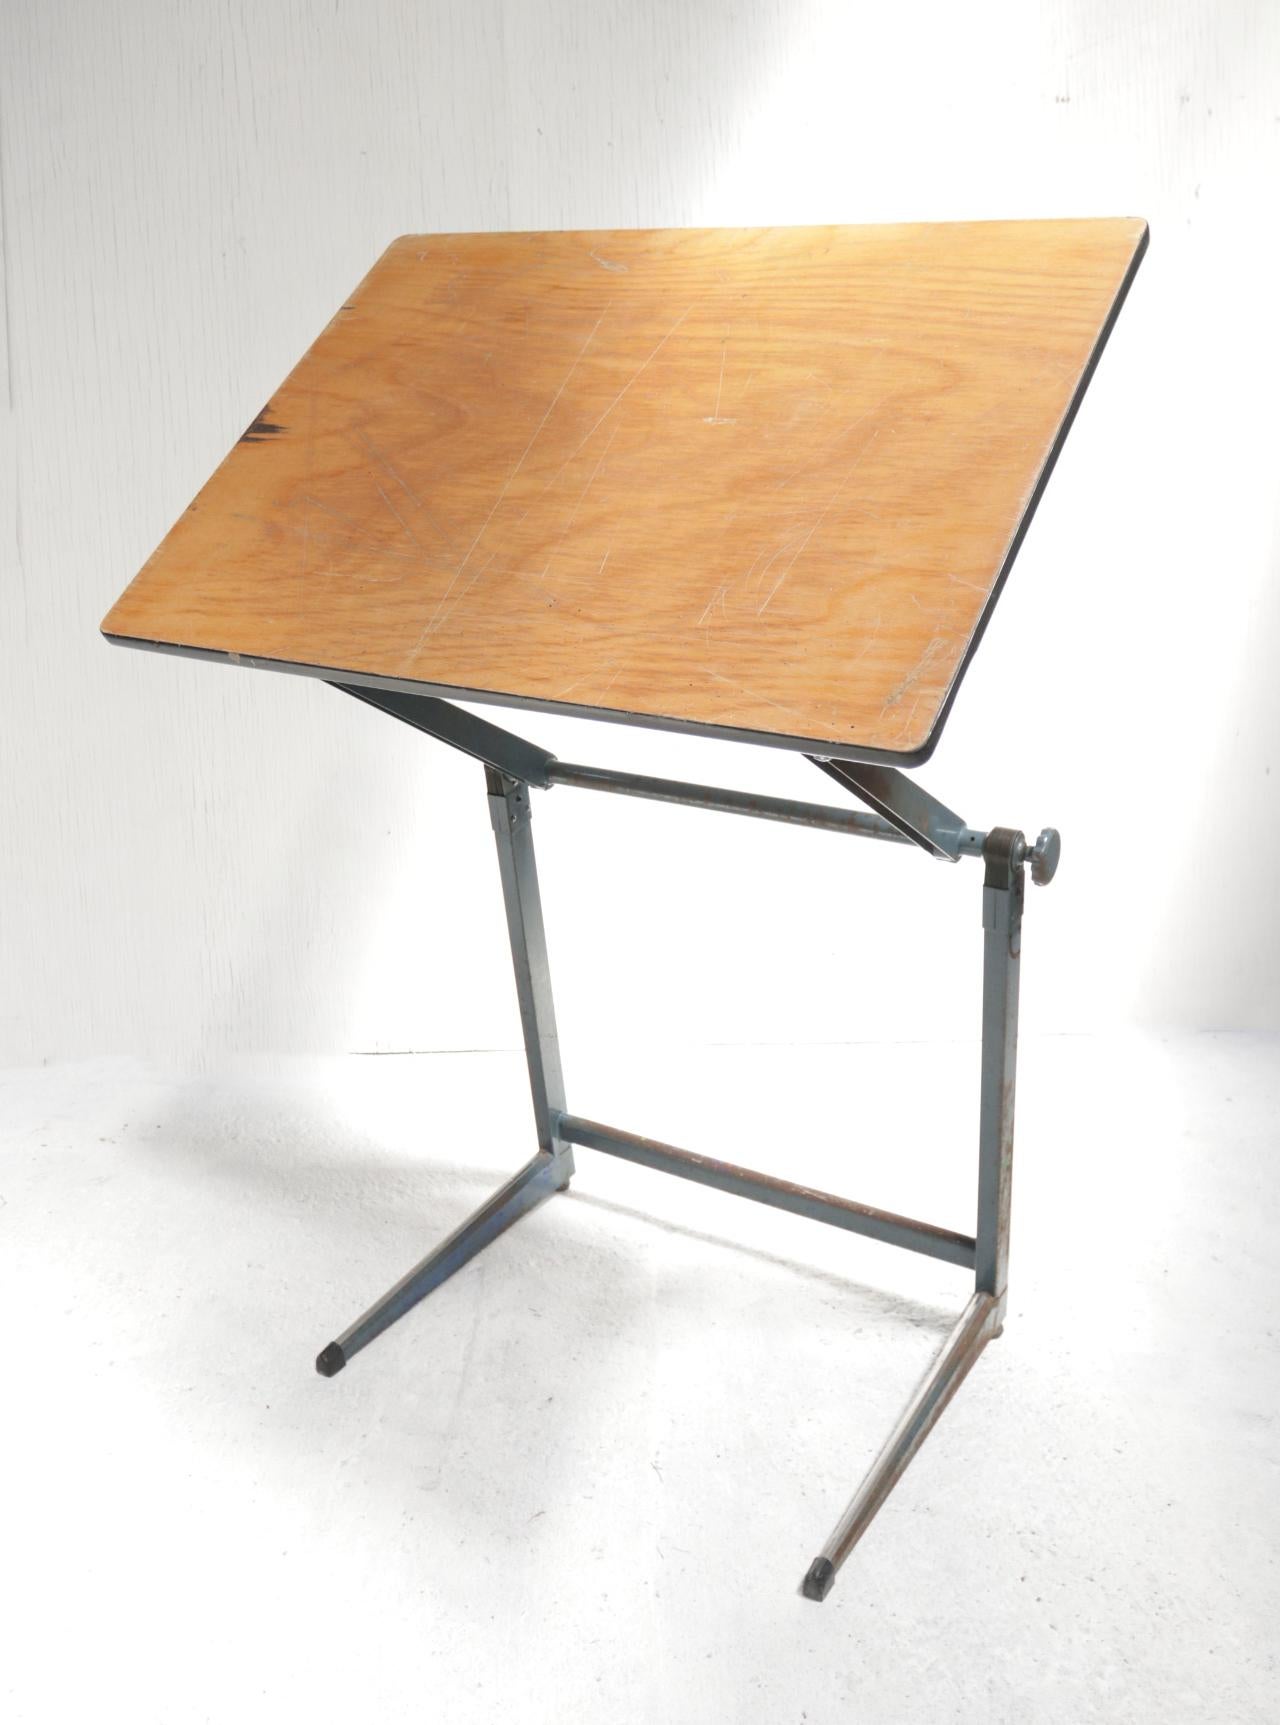 Marko Architect drafting table Dutch design from the 1960.
You can fold this table together or put it almost upright.
Beautiful patina and industrial look due to signs of wear.
Dimensions tabletop: 66 x 90.5 cm.